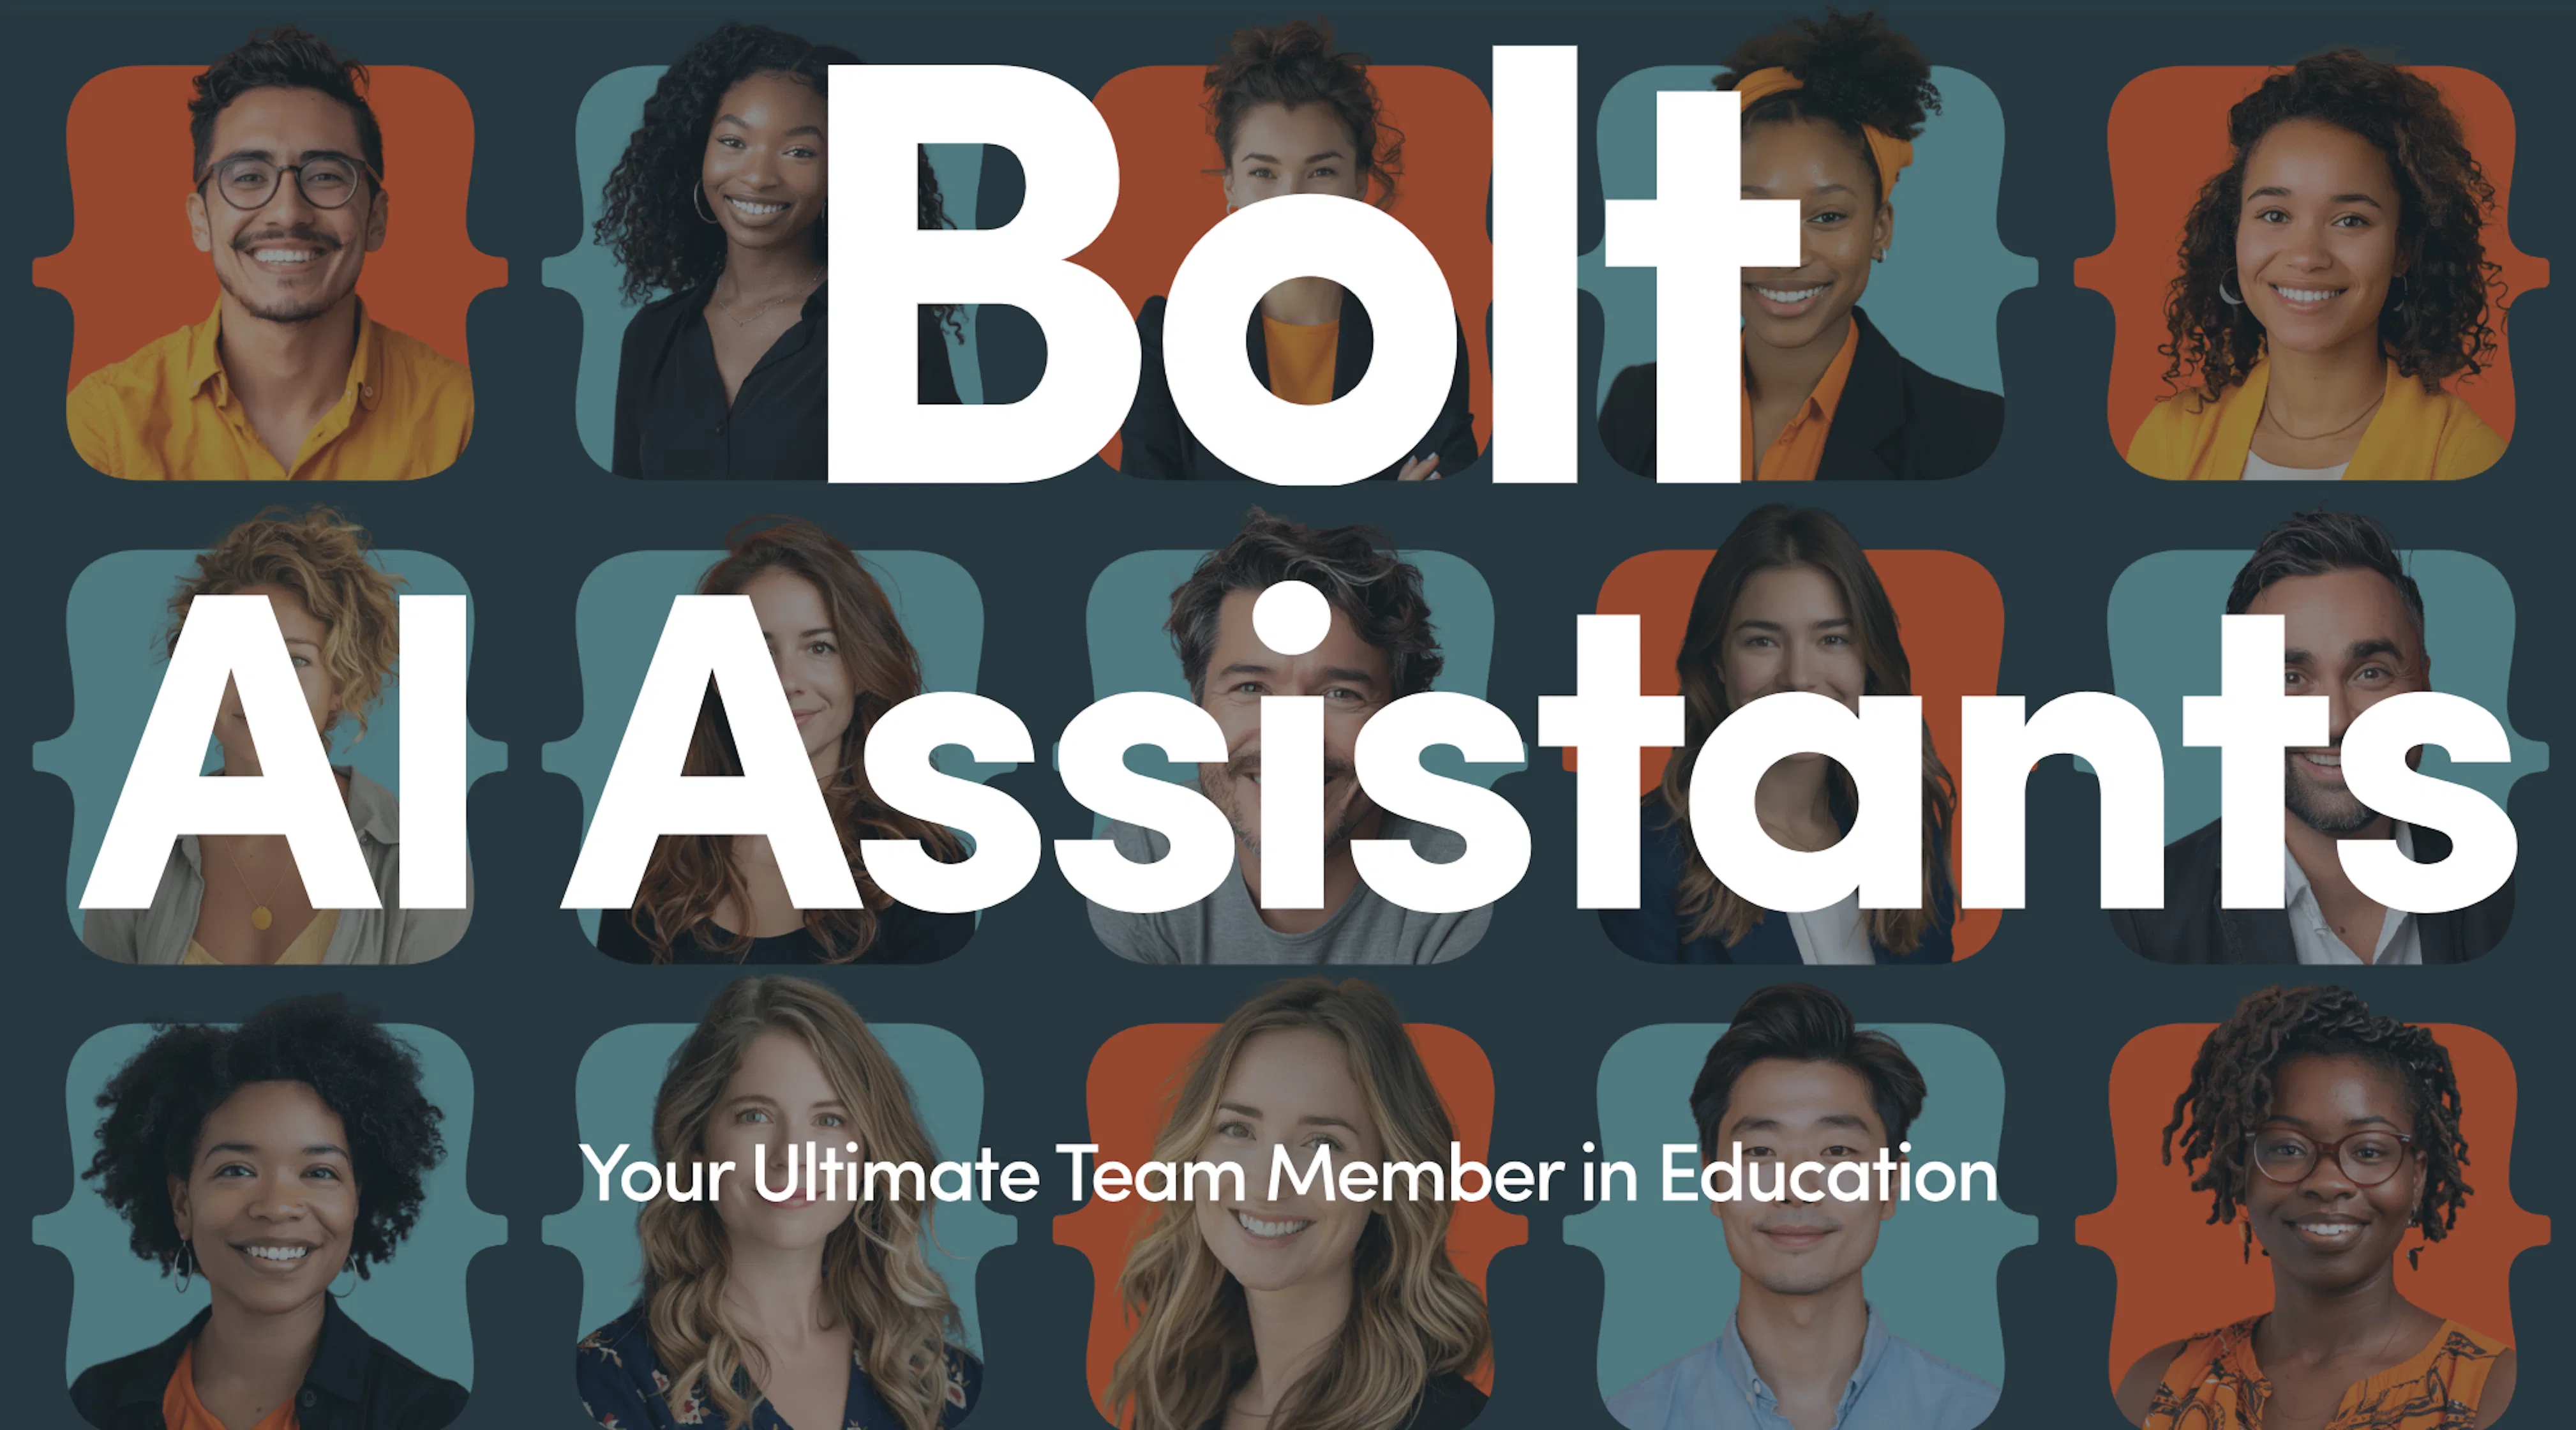 A graphic showing the new Bolt AI Assistants